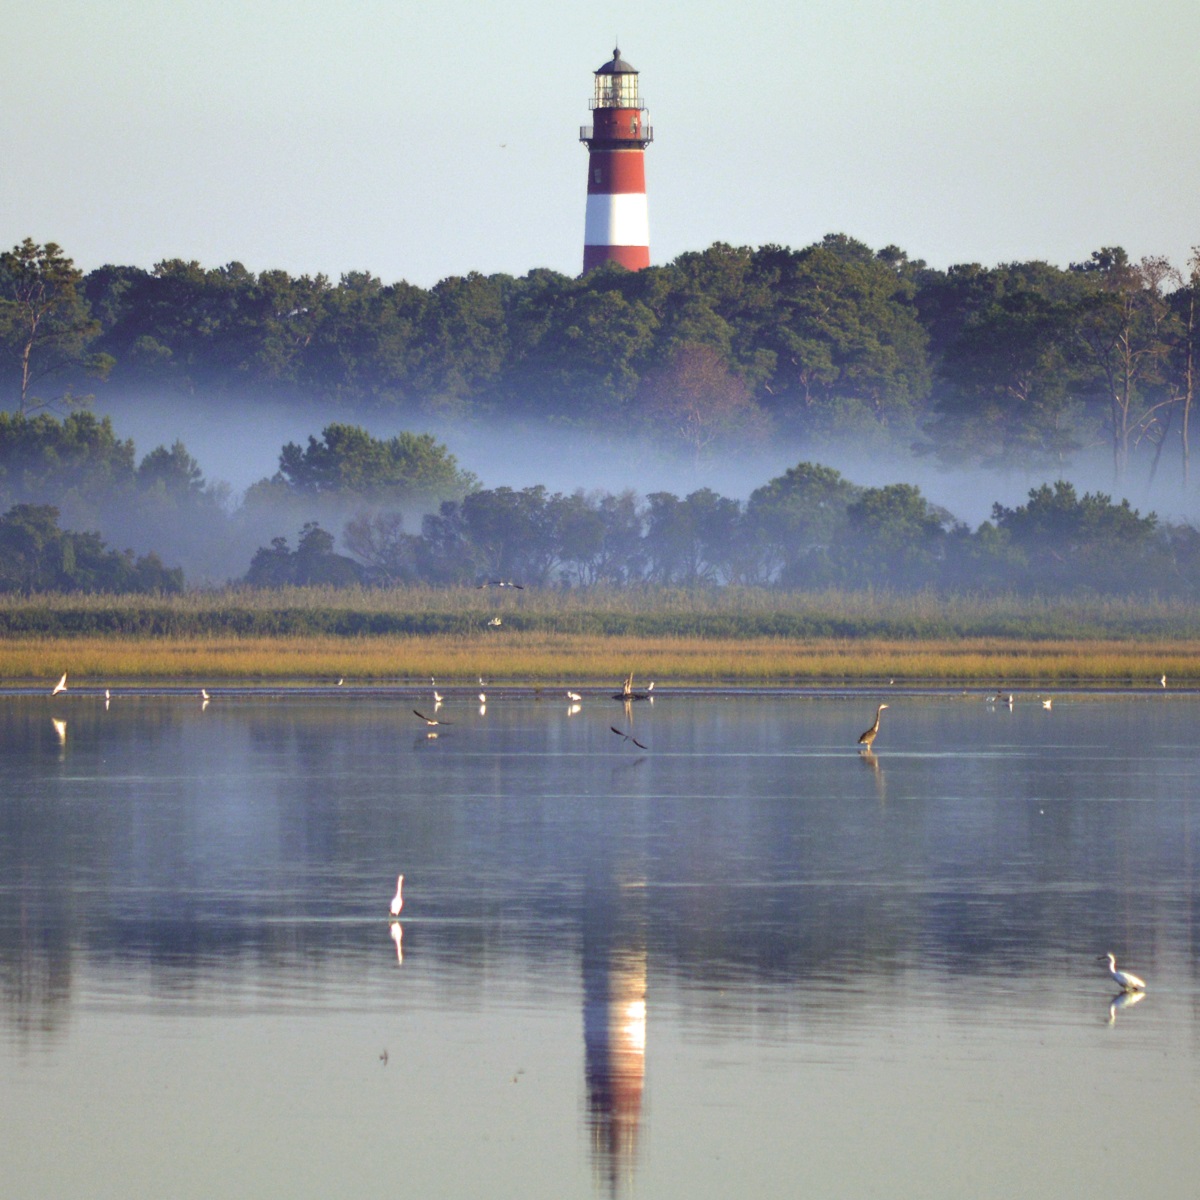 The Chincoteague Lighthouse reflected in the water with wild birds in the front